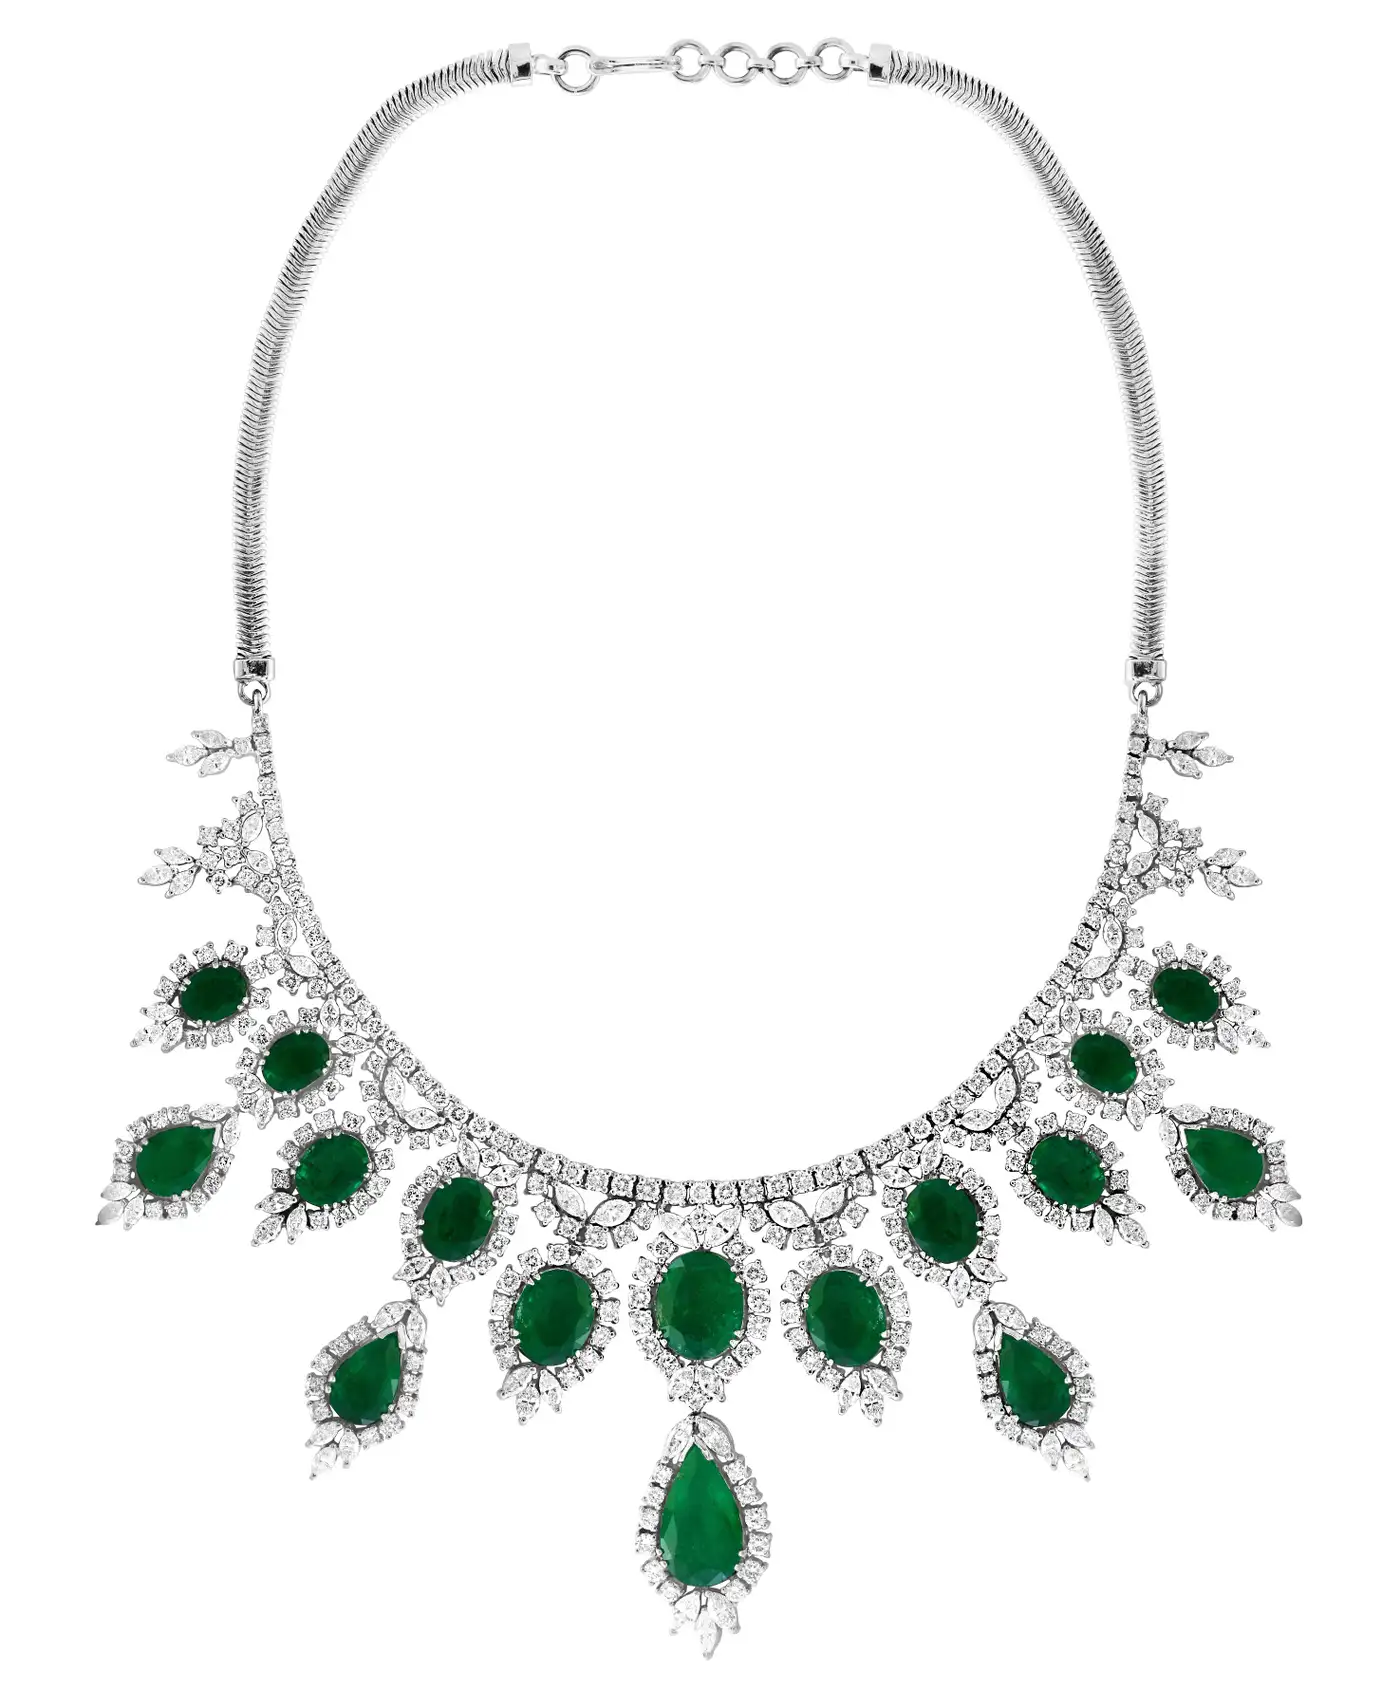 GIA-Certified-65-Ct-Emerald-and-Diamond-Necklace-and-Earring-Bridal-Suite-23.webp